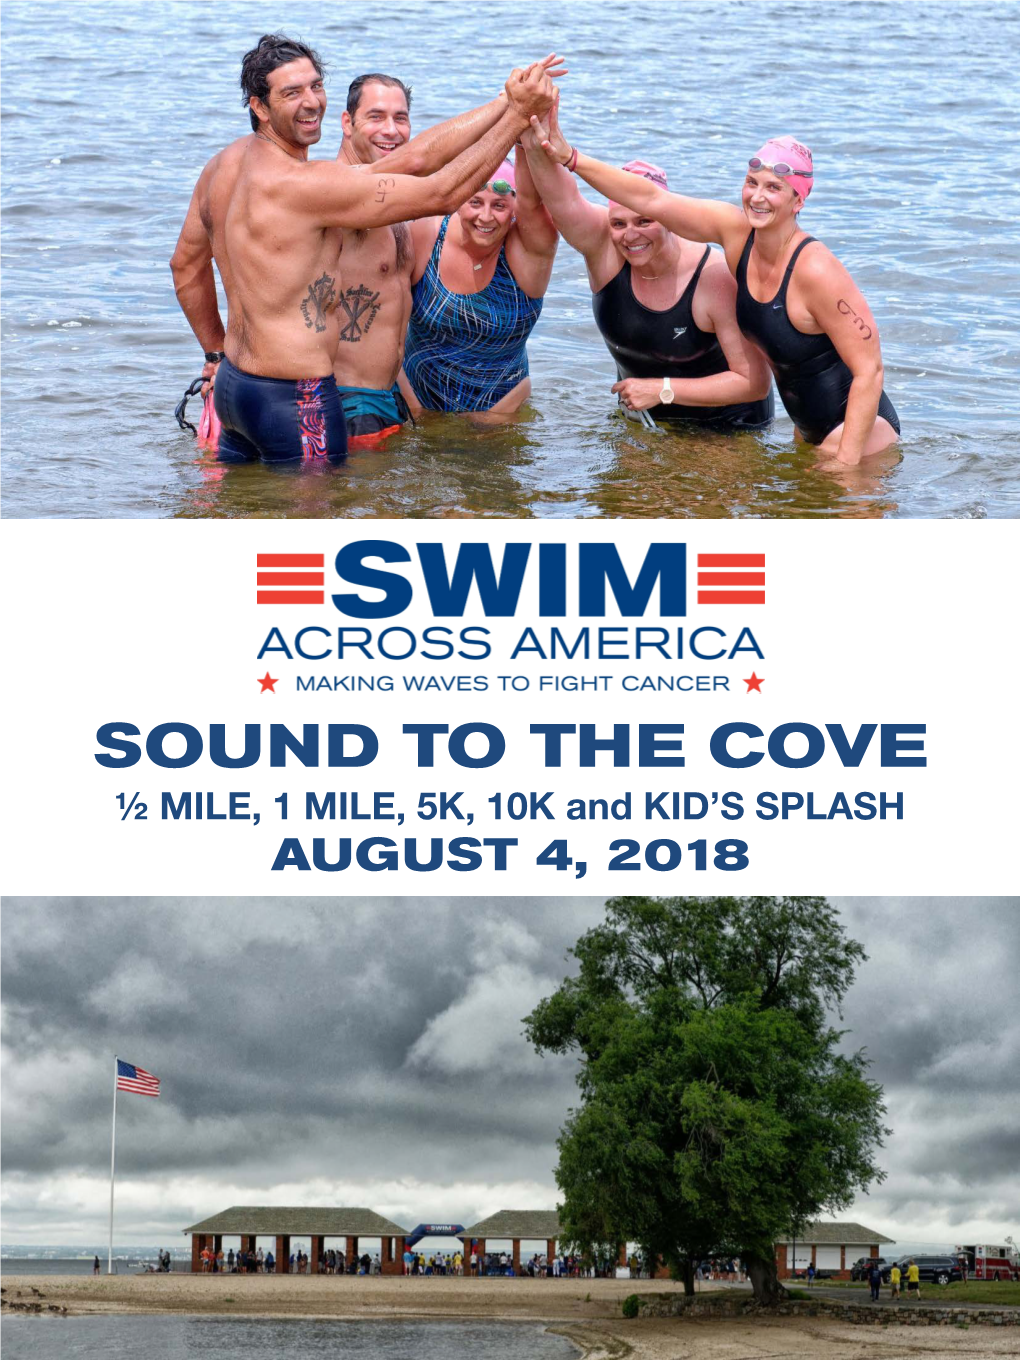 SOUND to the COVE ½ MILE, 1 MILE, 5K, 10K and KID’S SPLASH AUGUST 4, 2018